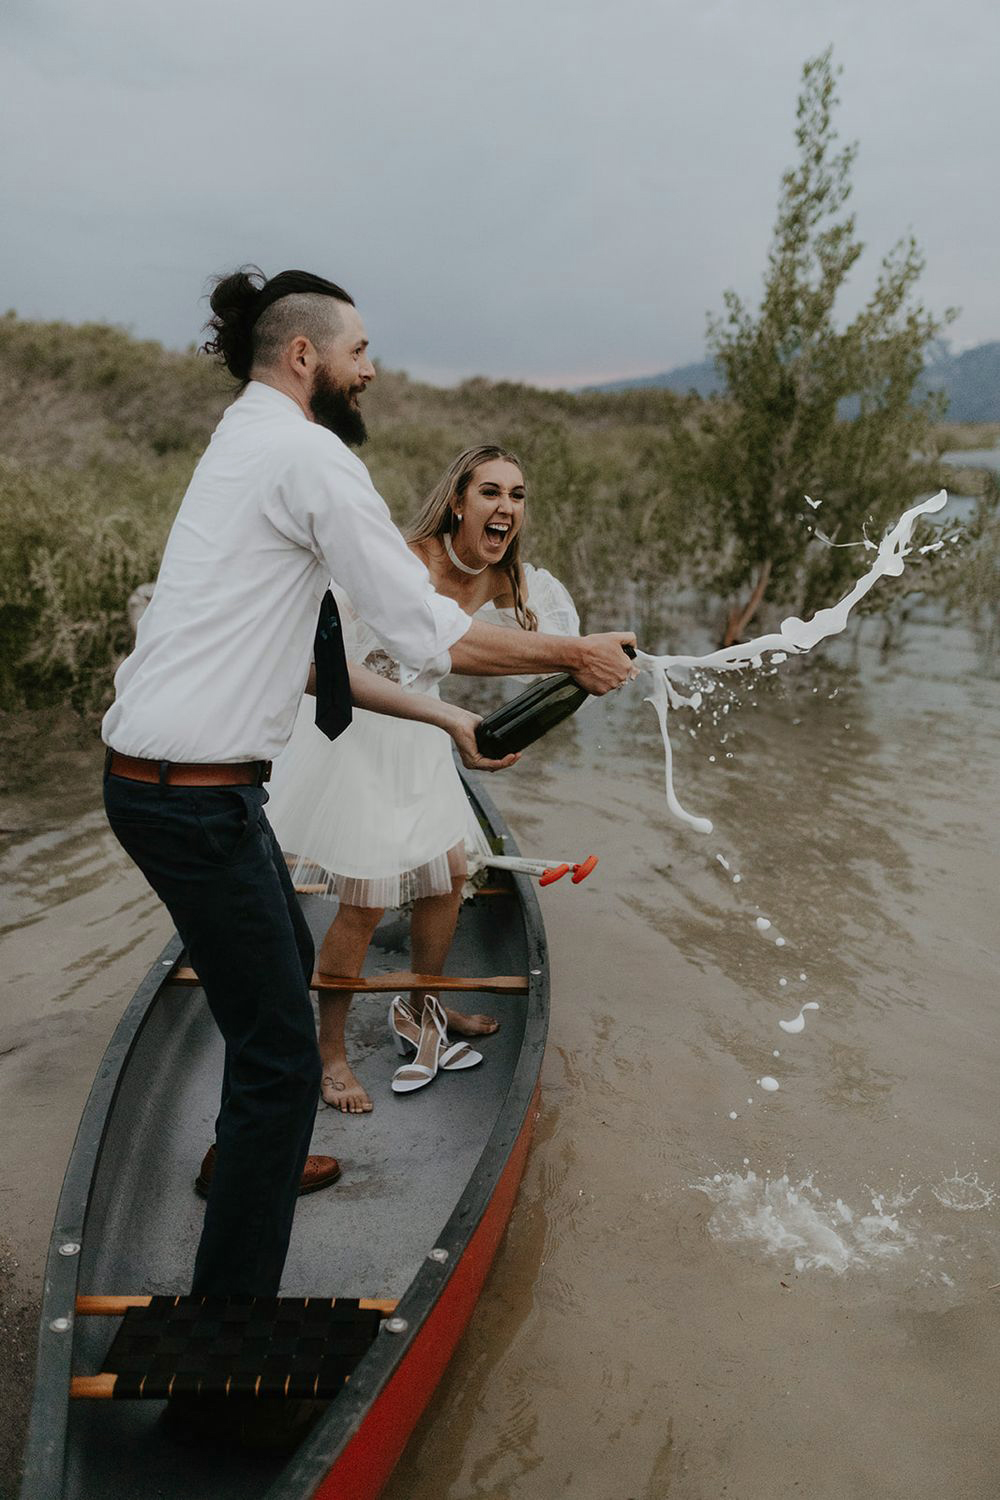 couples popping champagne on canoe in lake with mountains and sunset in background